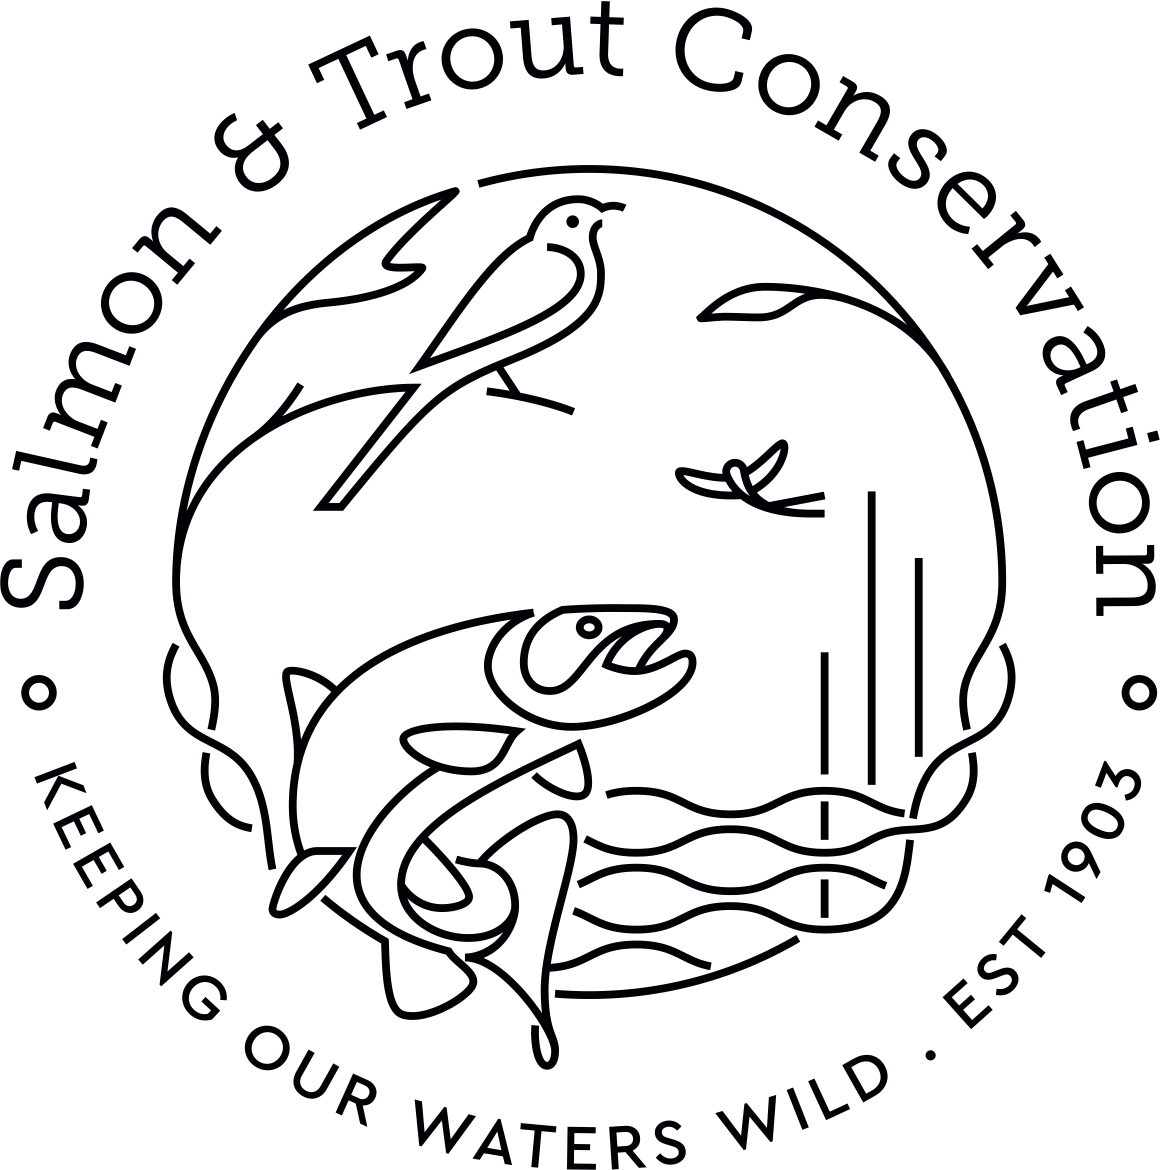 Salmon and Trout Conservation